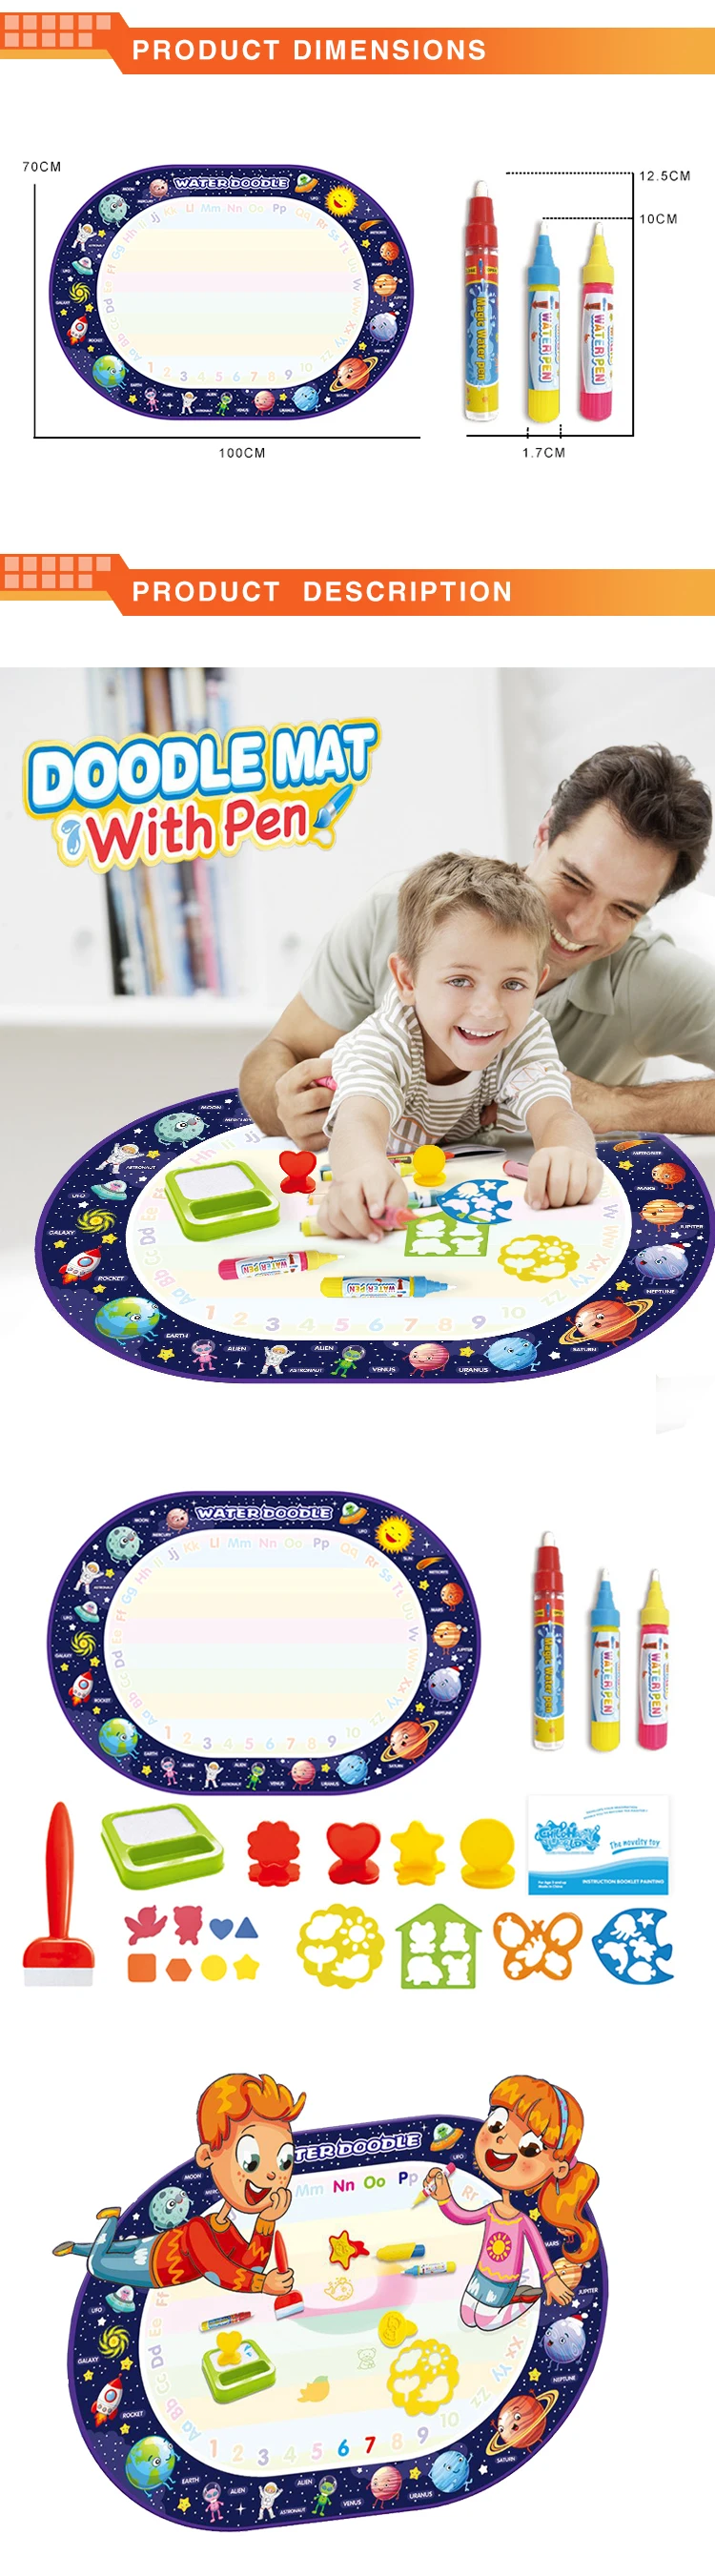 Amazon Best Selling Magic Doodle Mat Free Space Theme Writing Painting Educational Toys Water Drawing Mat